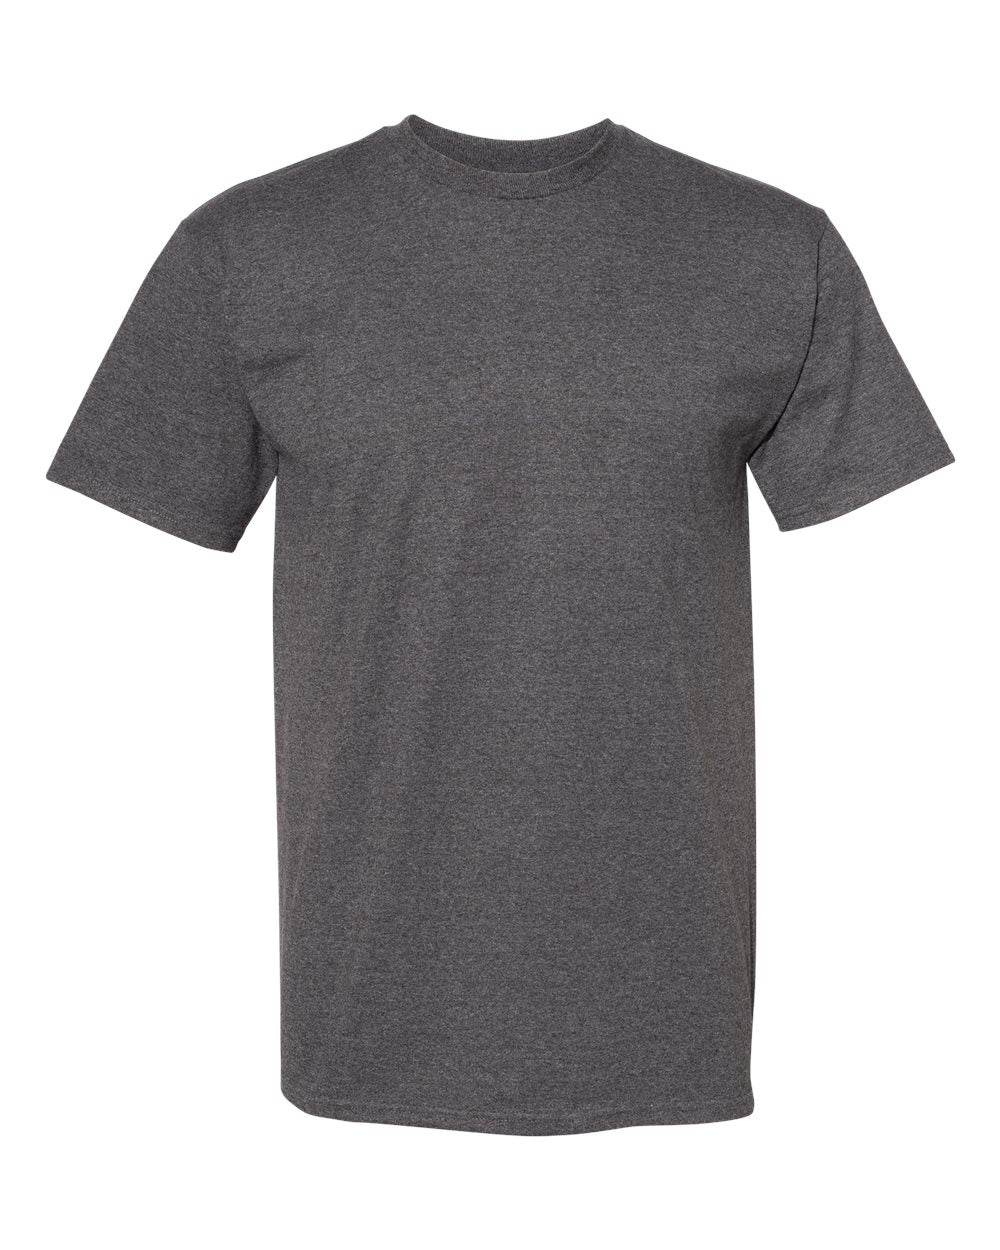 American Apparel Midweight Cotton Unisex Tee 1701 #color_Heather Charcoal